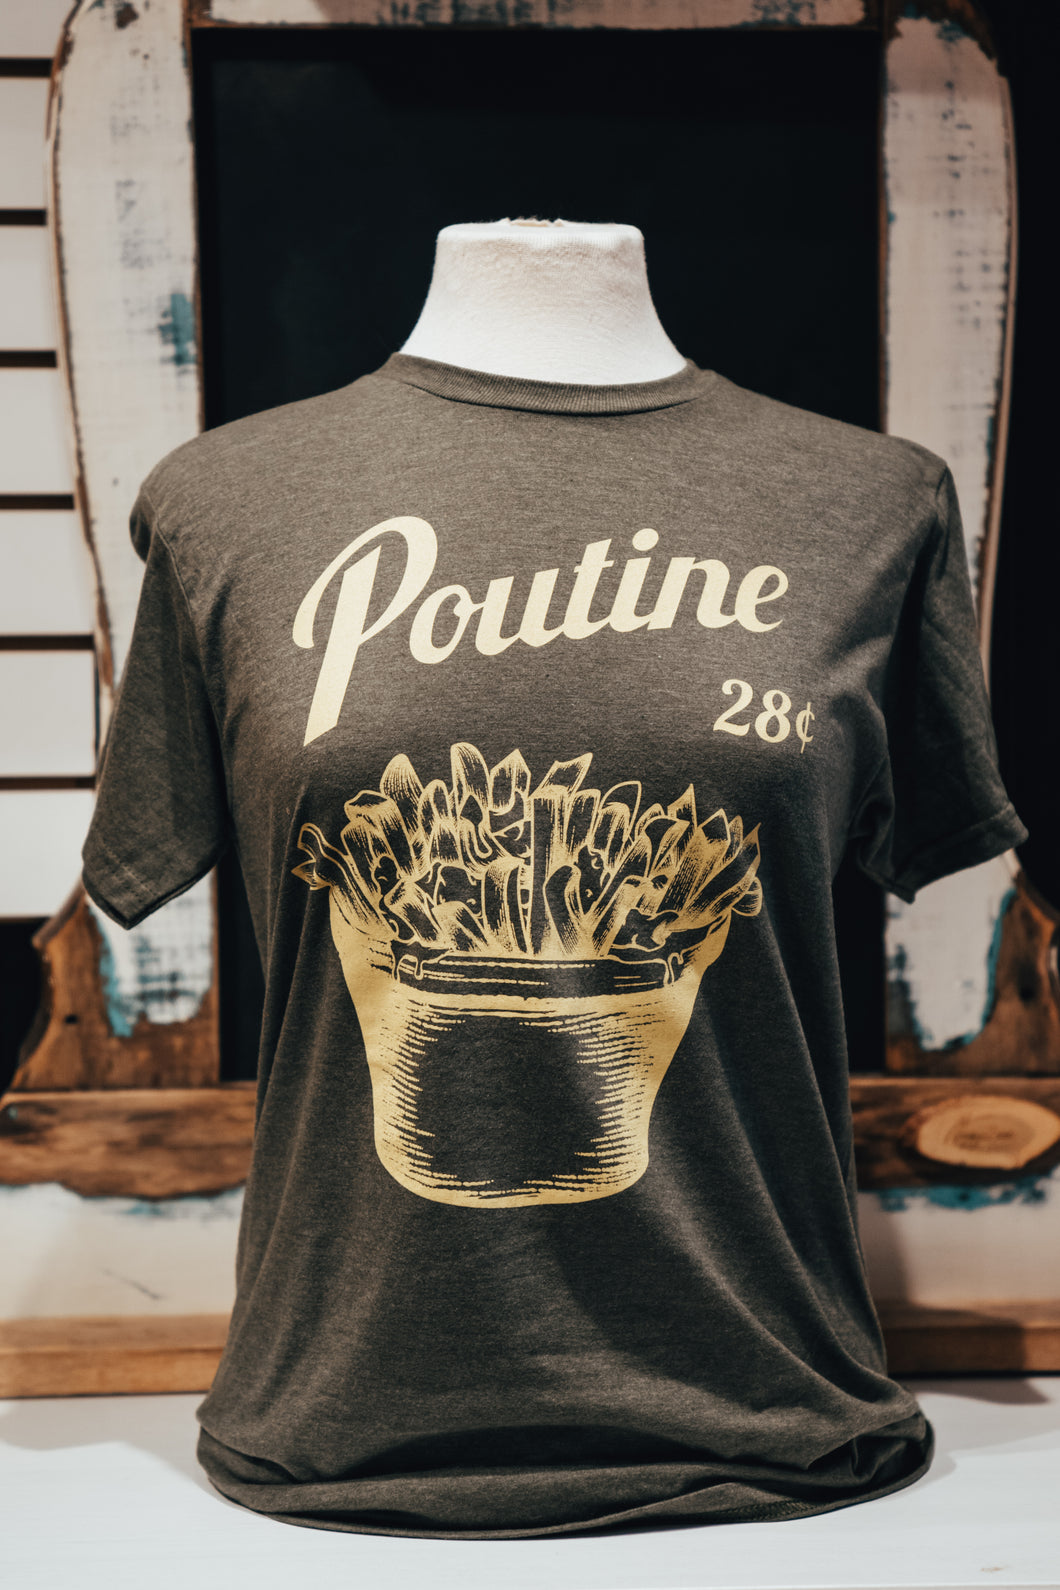 t shirt poutine vintage green quebec gravy french fries cheese curds tee shirt poutine canada national dish meal plat national canada quebec montréal hand printed